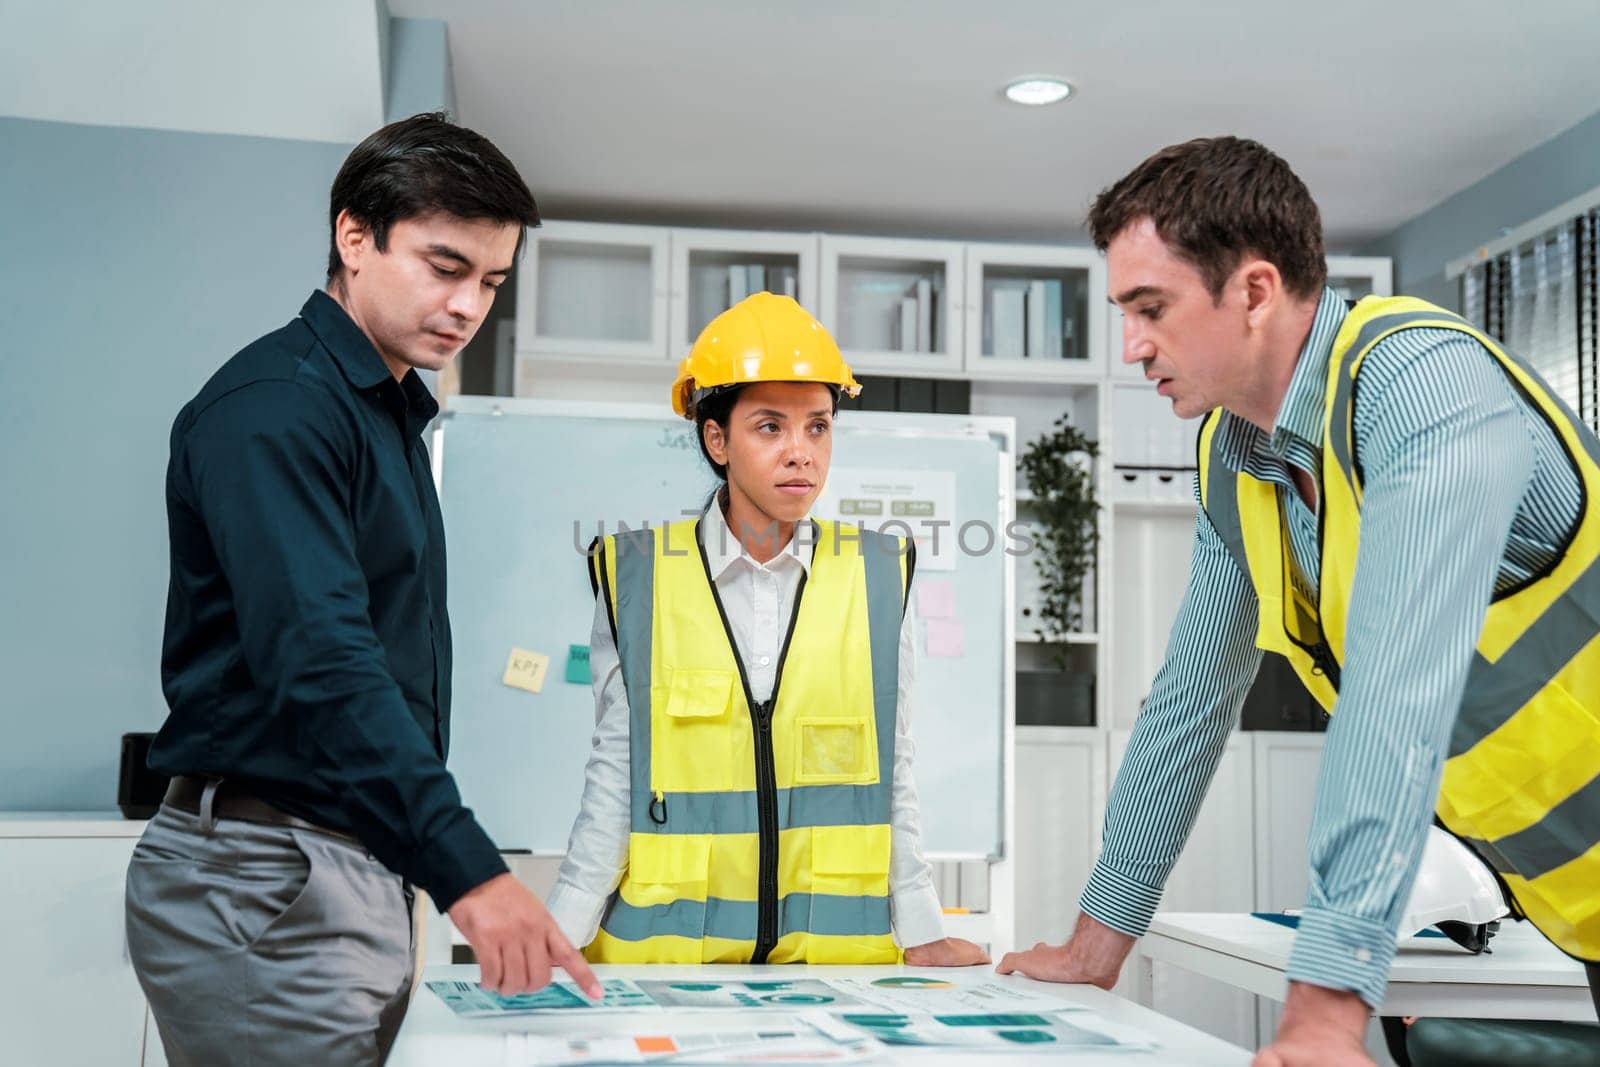 A group of competent engineers and employer discuss plans in the office. Architectural investor, businessman, and engineer discussing blueprints.